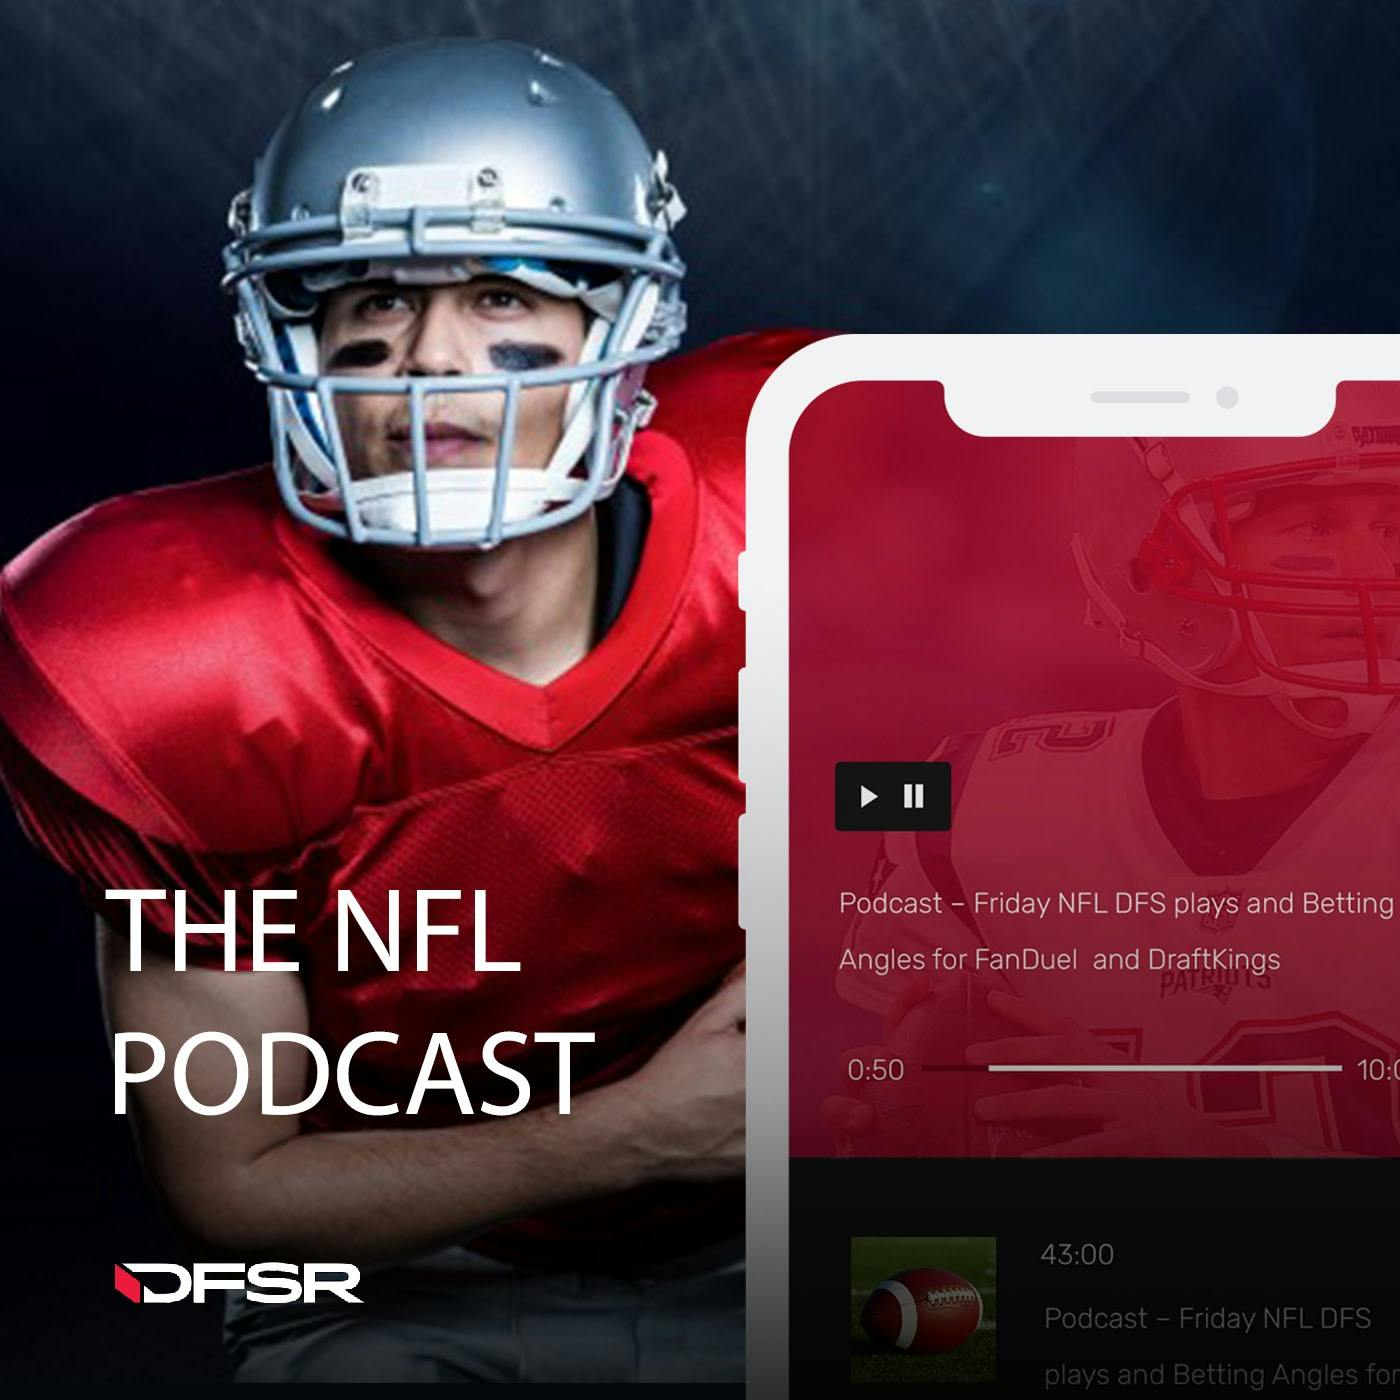 DFS NFL Podcast Week 1 Recap and Week 2 Preview for FanDuel and DraftKings